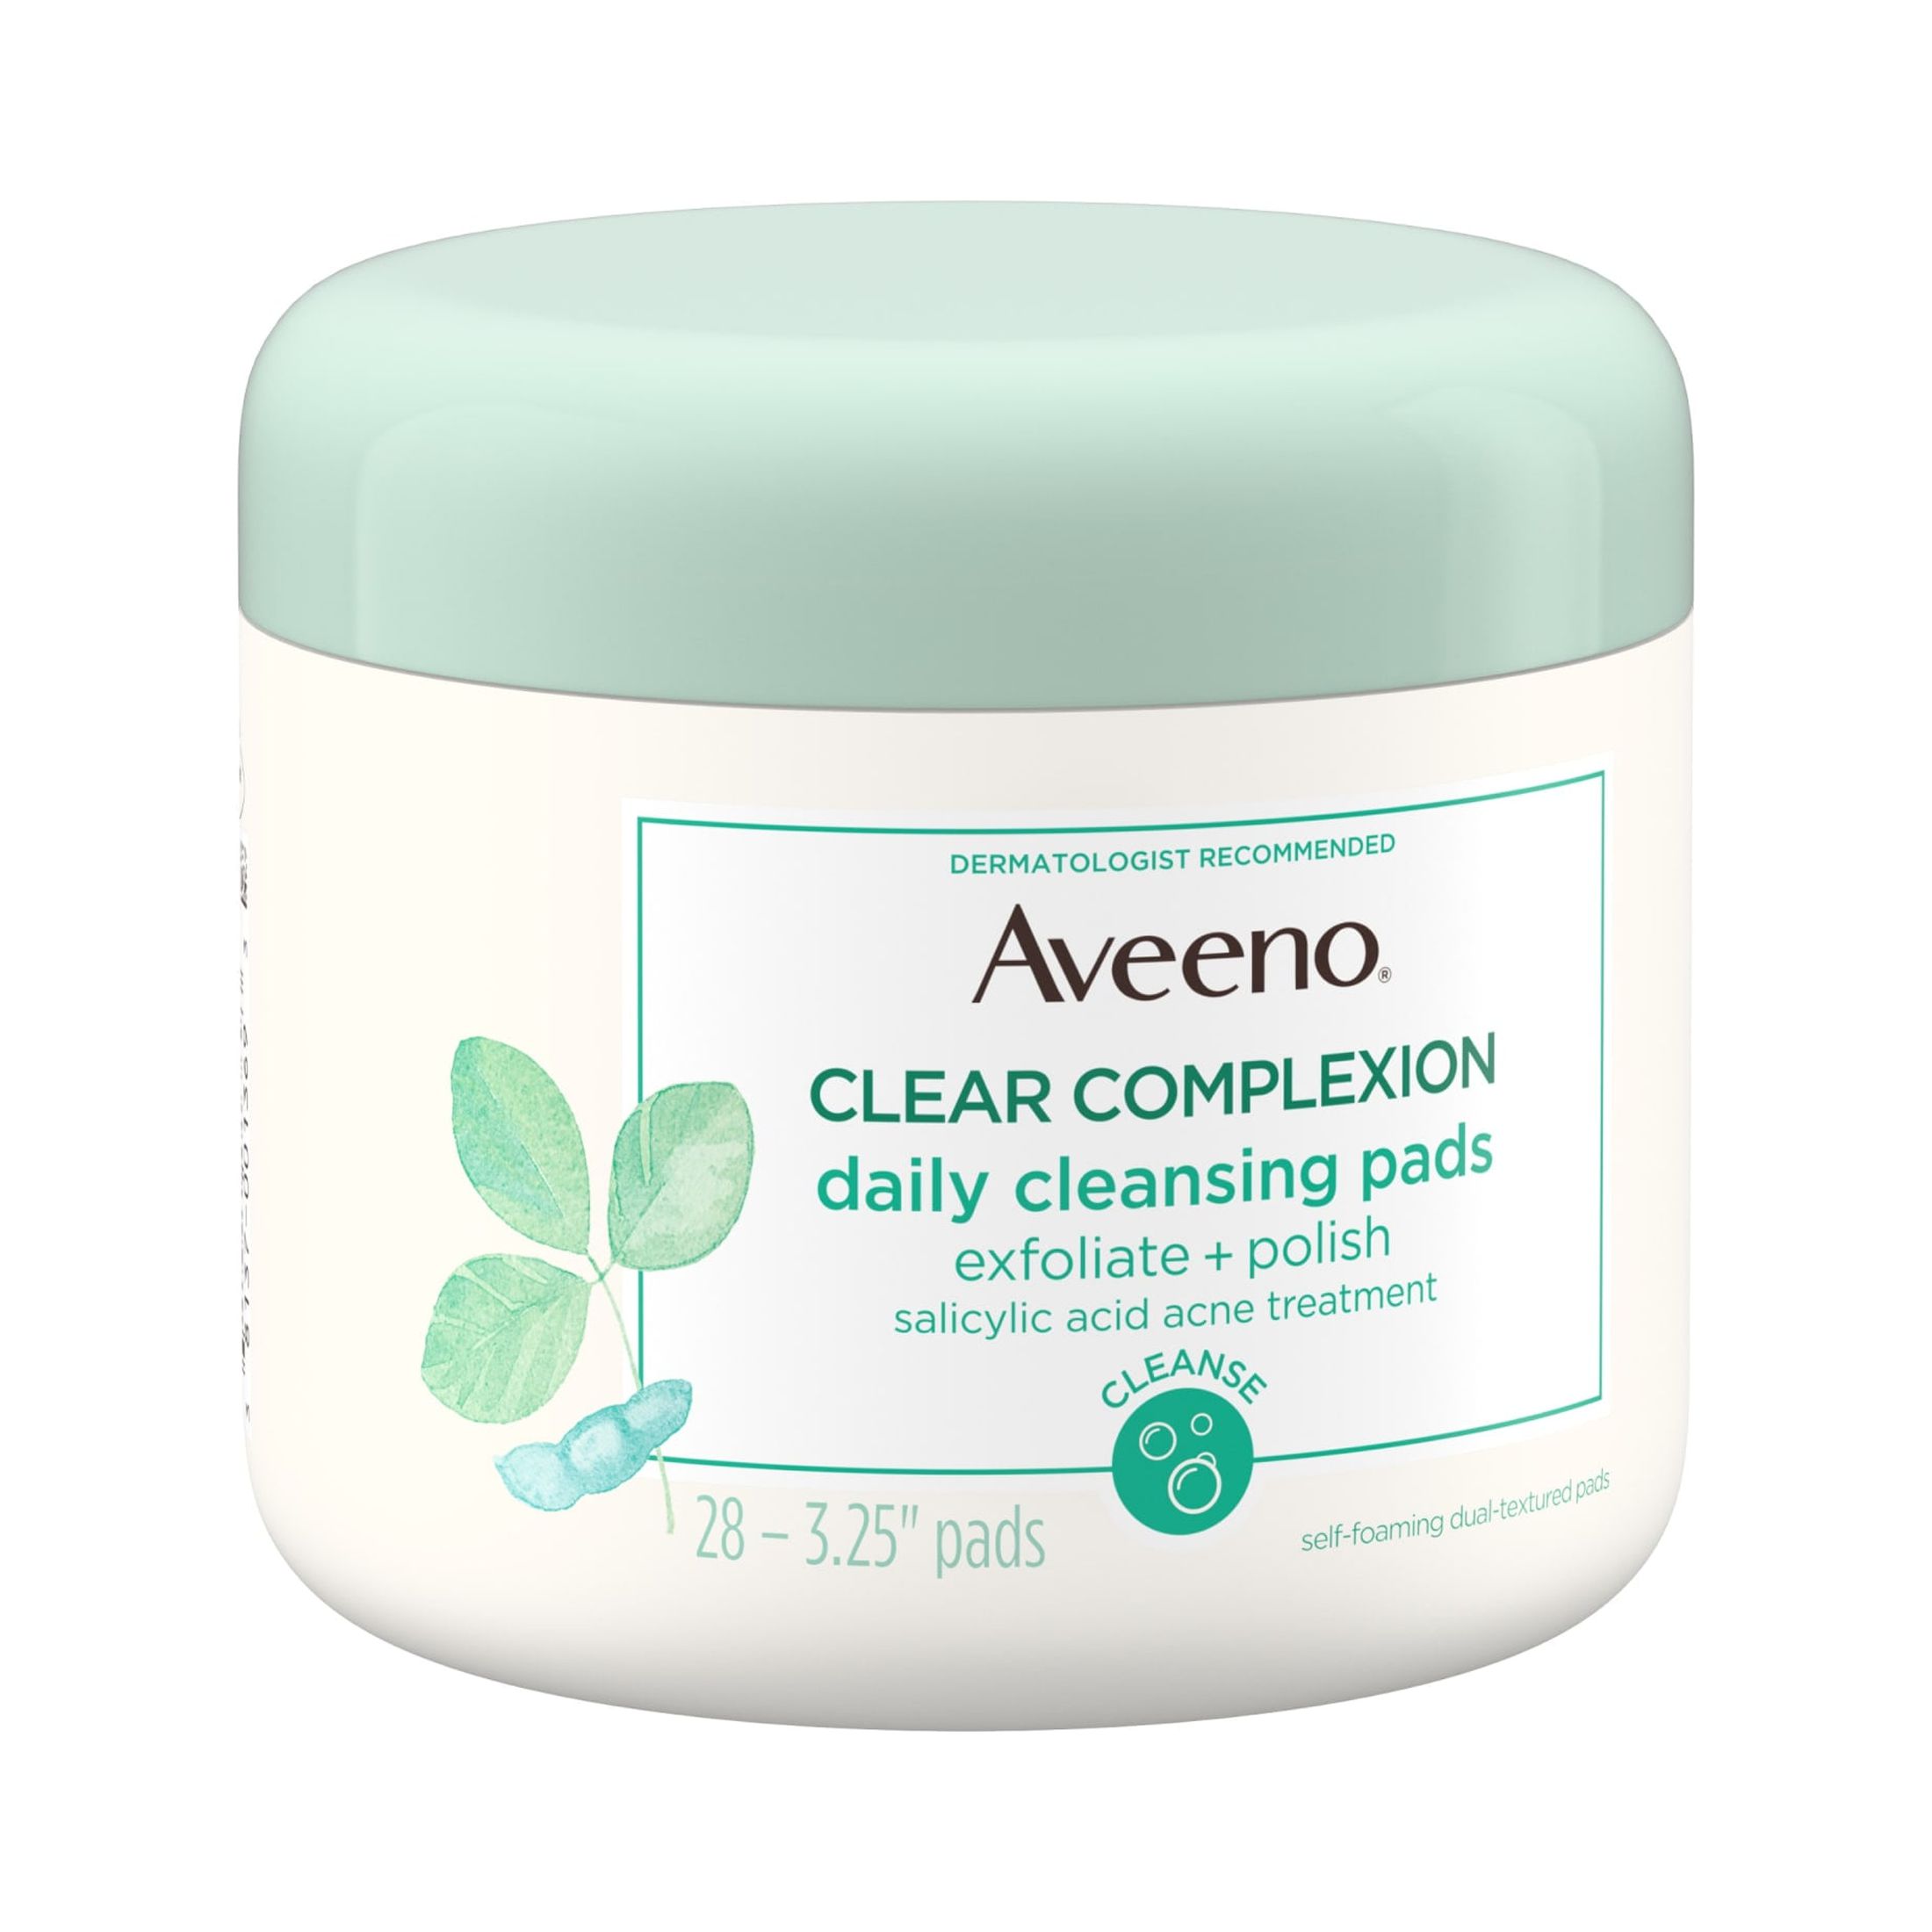 Aveeno Clear Complexion Acne Cleansing Pads, Salicylic Acid, 28 ct - image 5 of 8